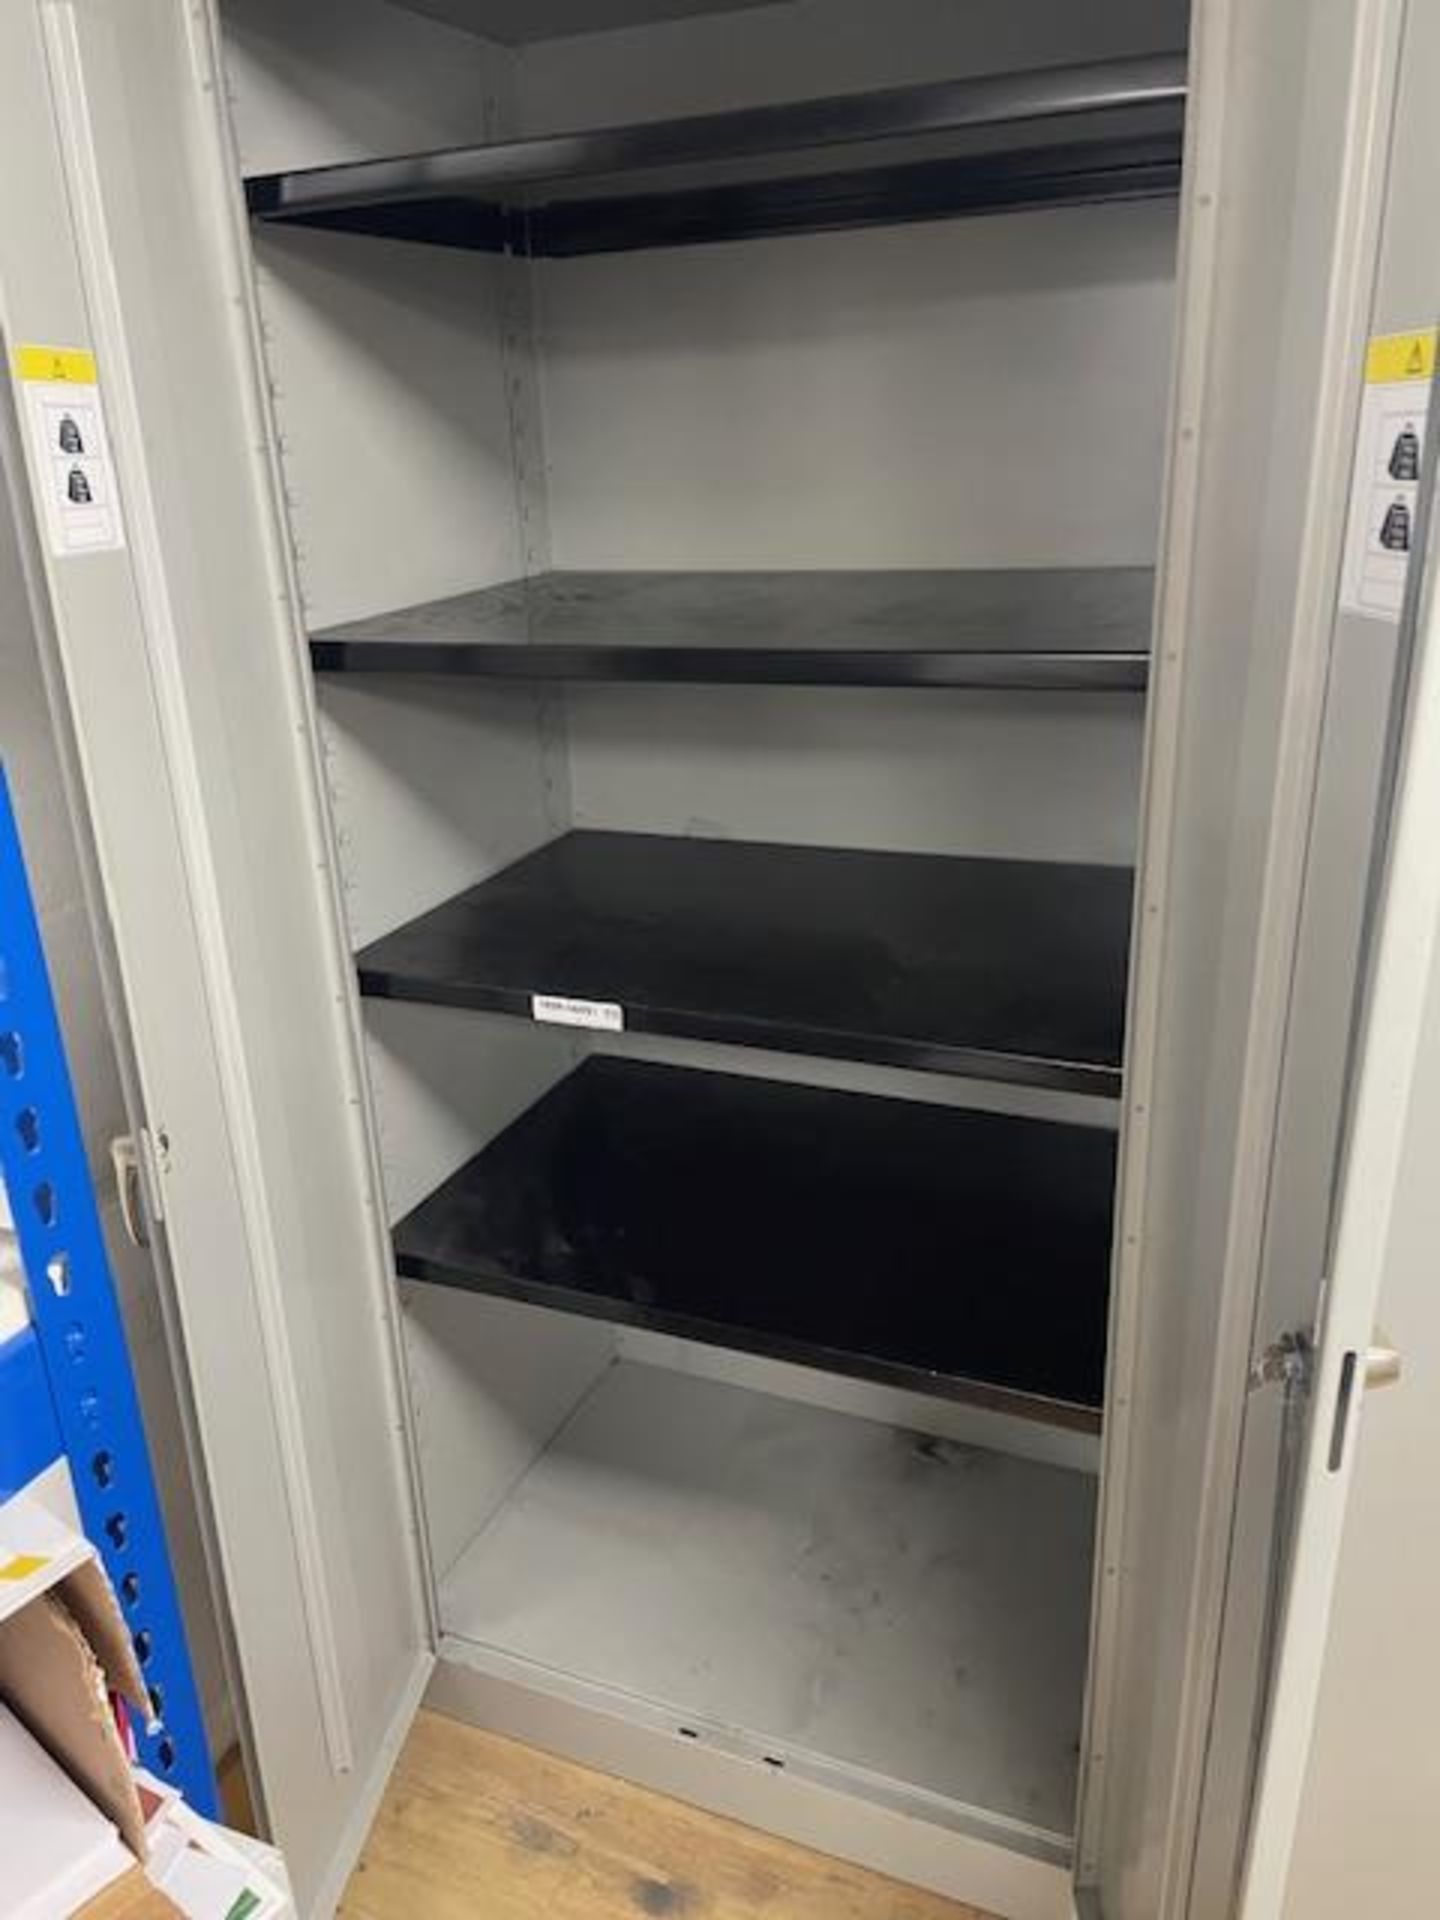 Two Double Door Staionery Cabinets & Contents of Peripherals, Wooden Shelving Unit, Labels etc (Loca